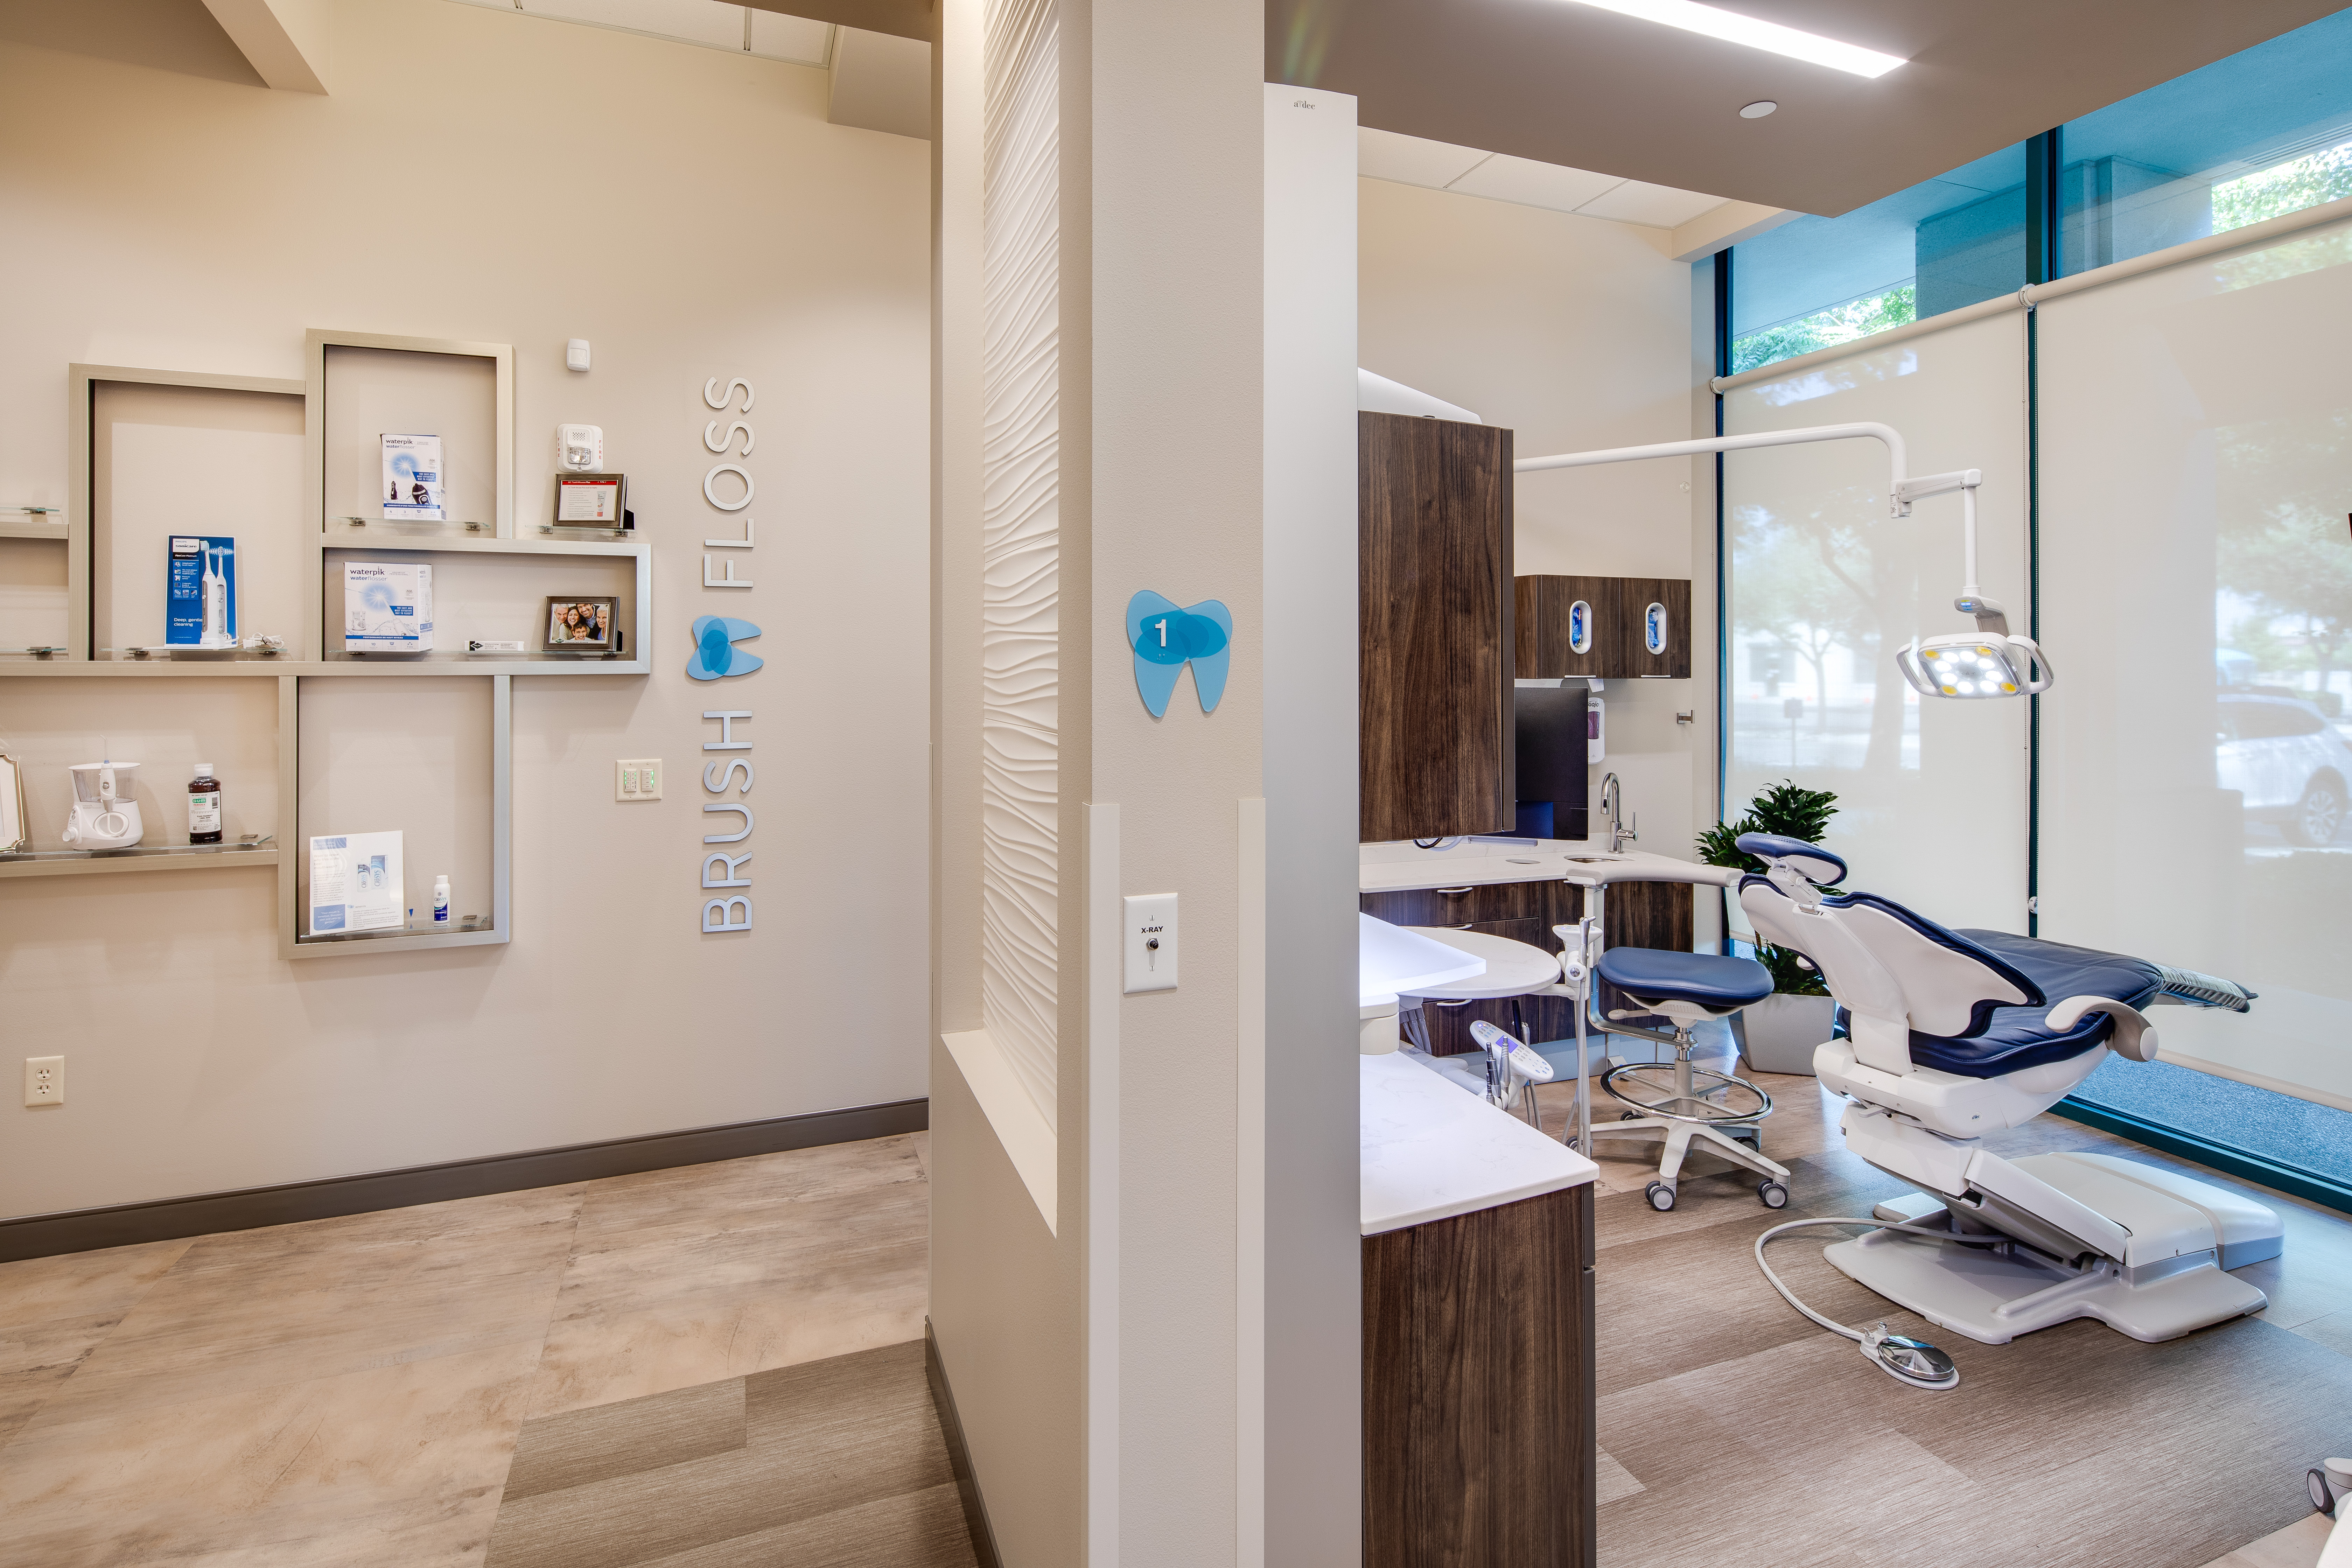 Fresno Dental Professionals Expands Production, Technology in New Office